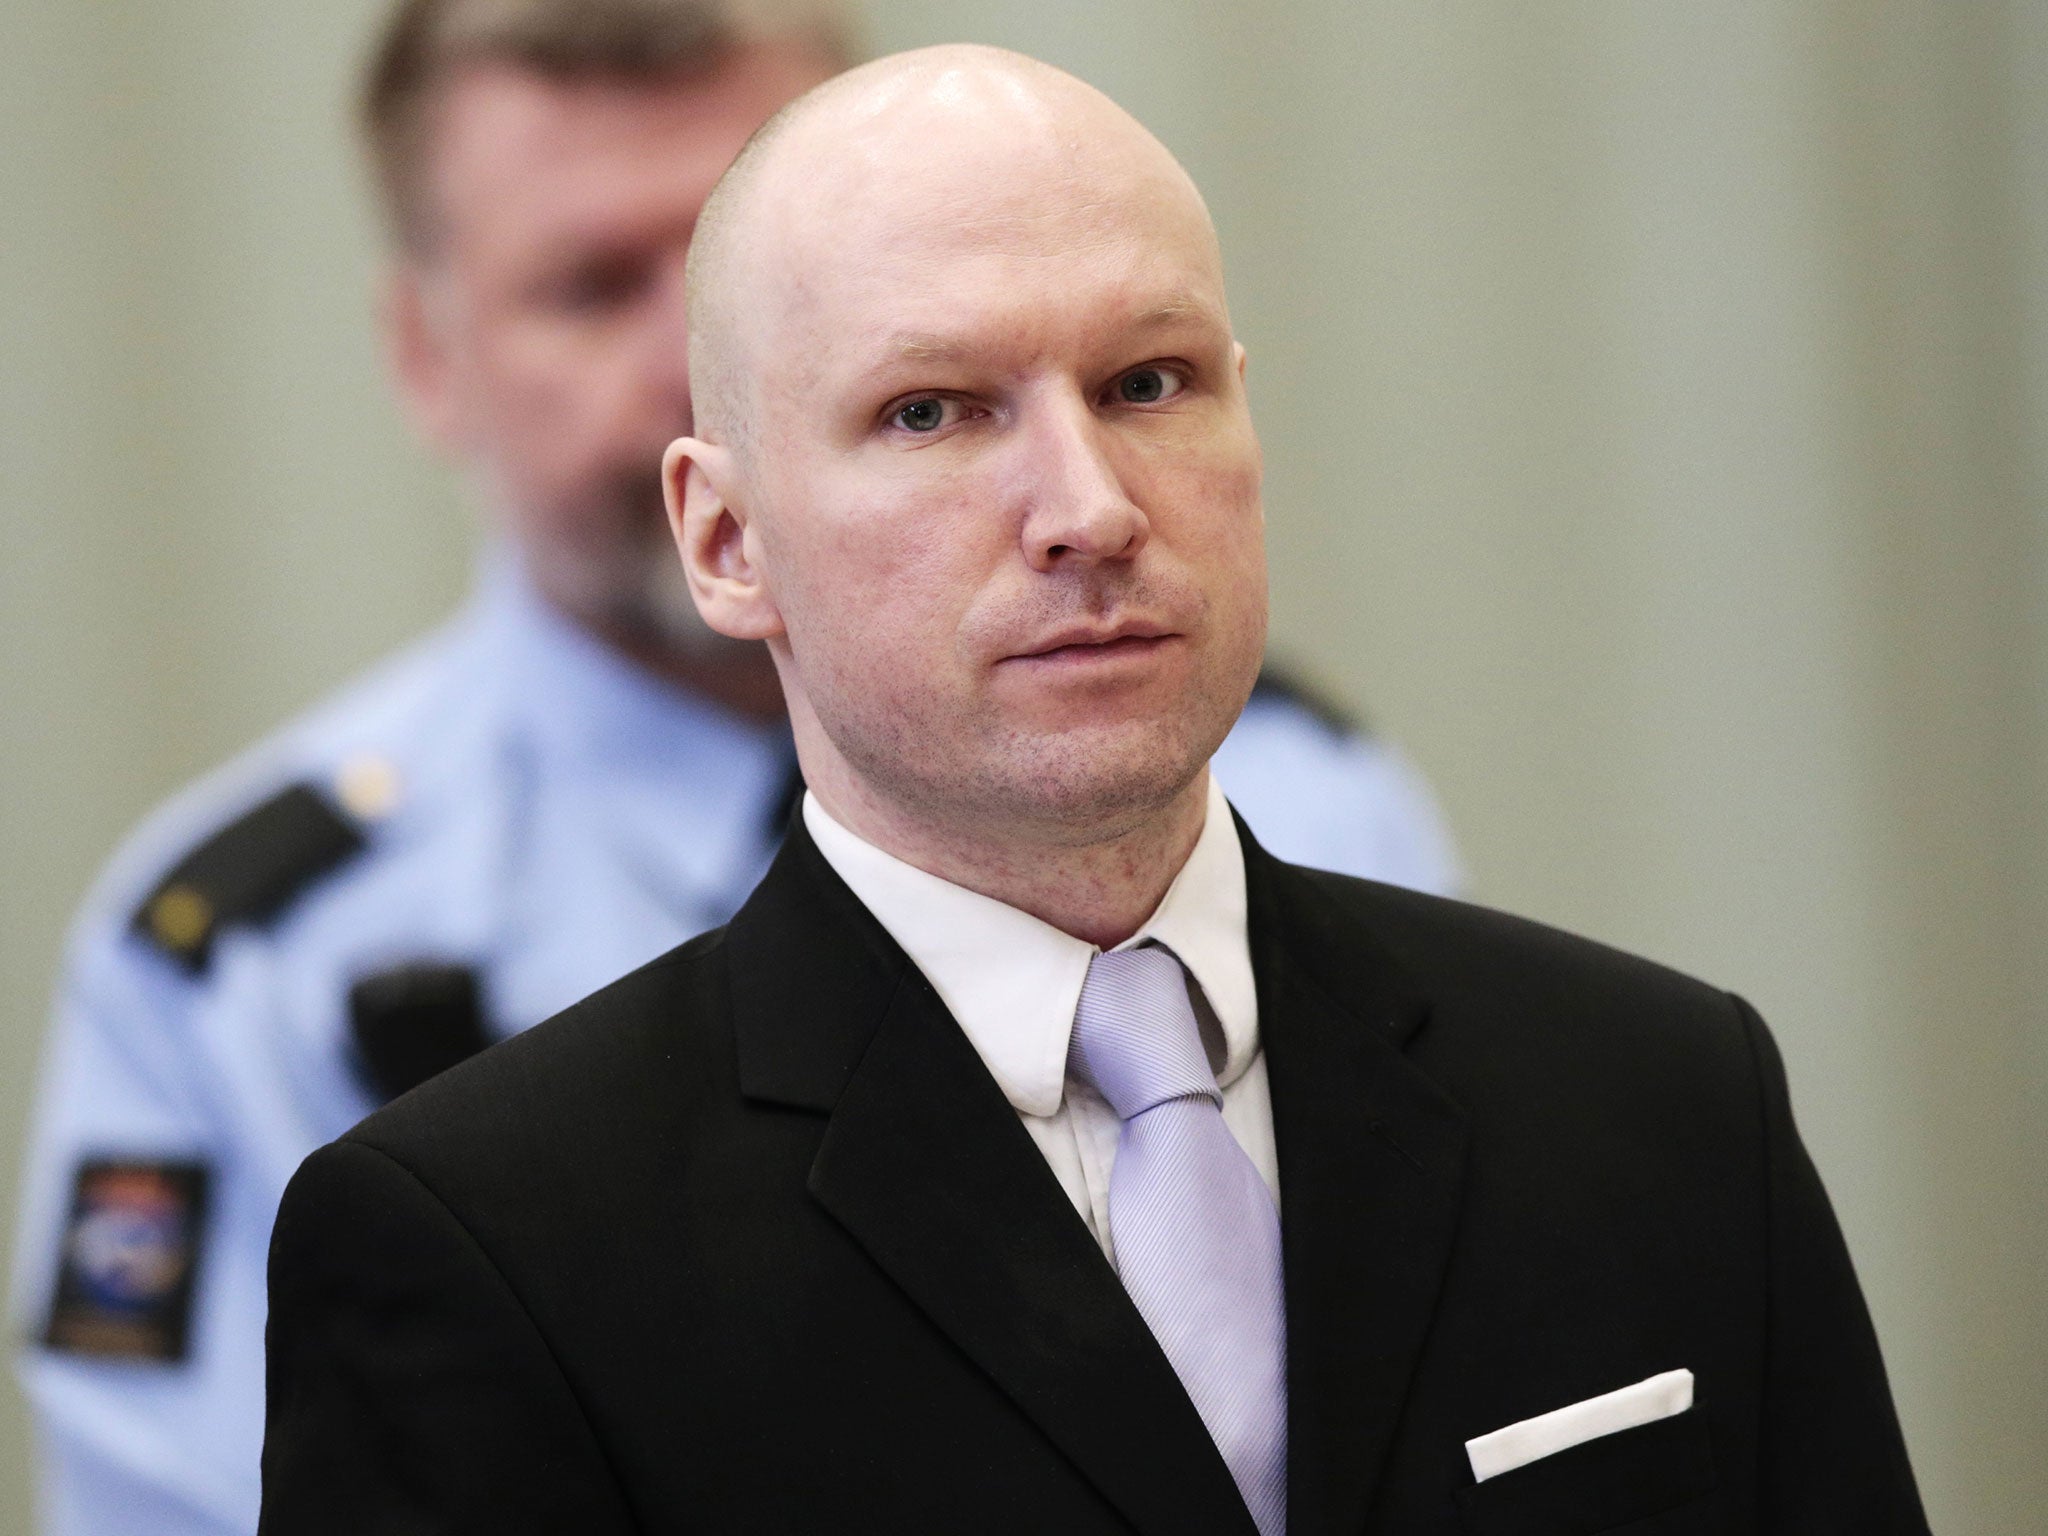 anders-breivik-right-wing-extremist-who-killed-77-people-in-norway